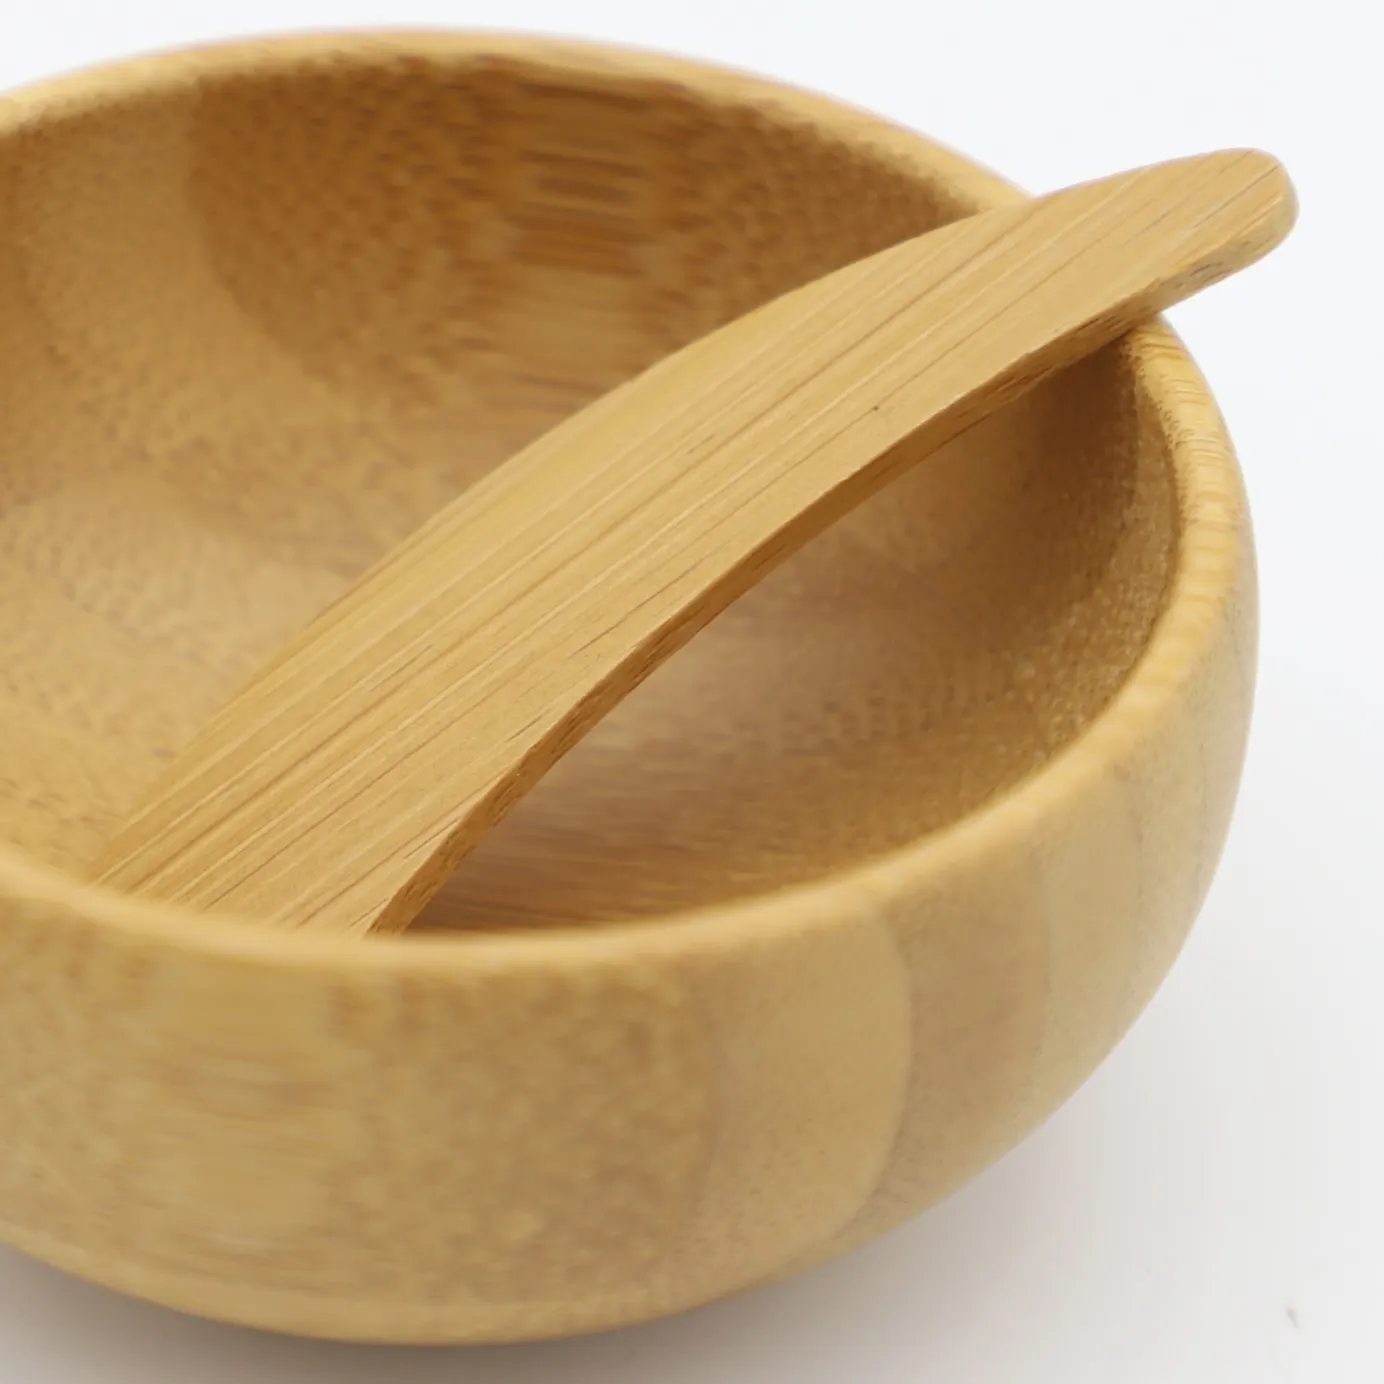 Eco Friendly Bamboo Bowl and Spoon Set for Skin Care